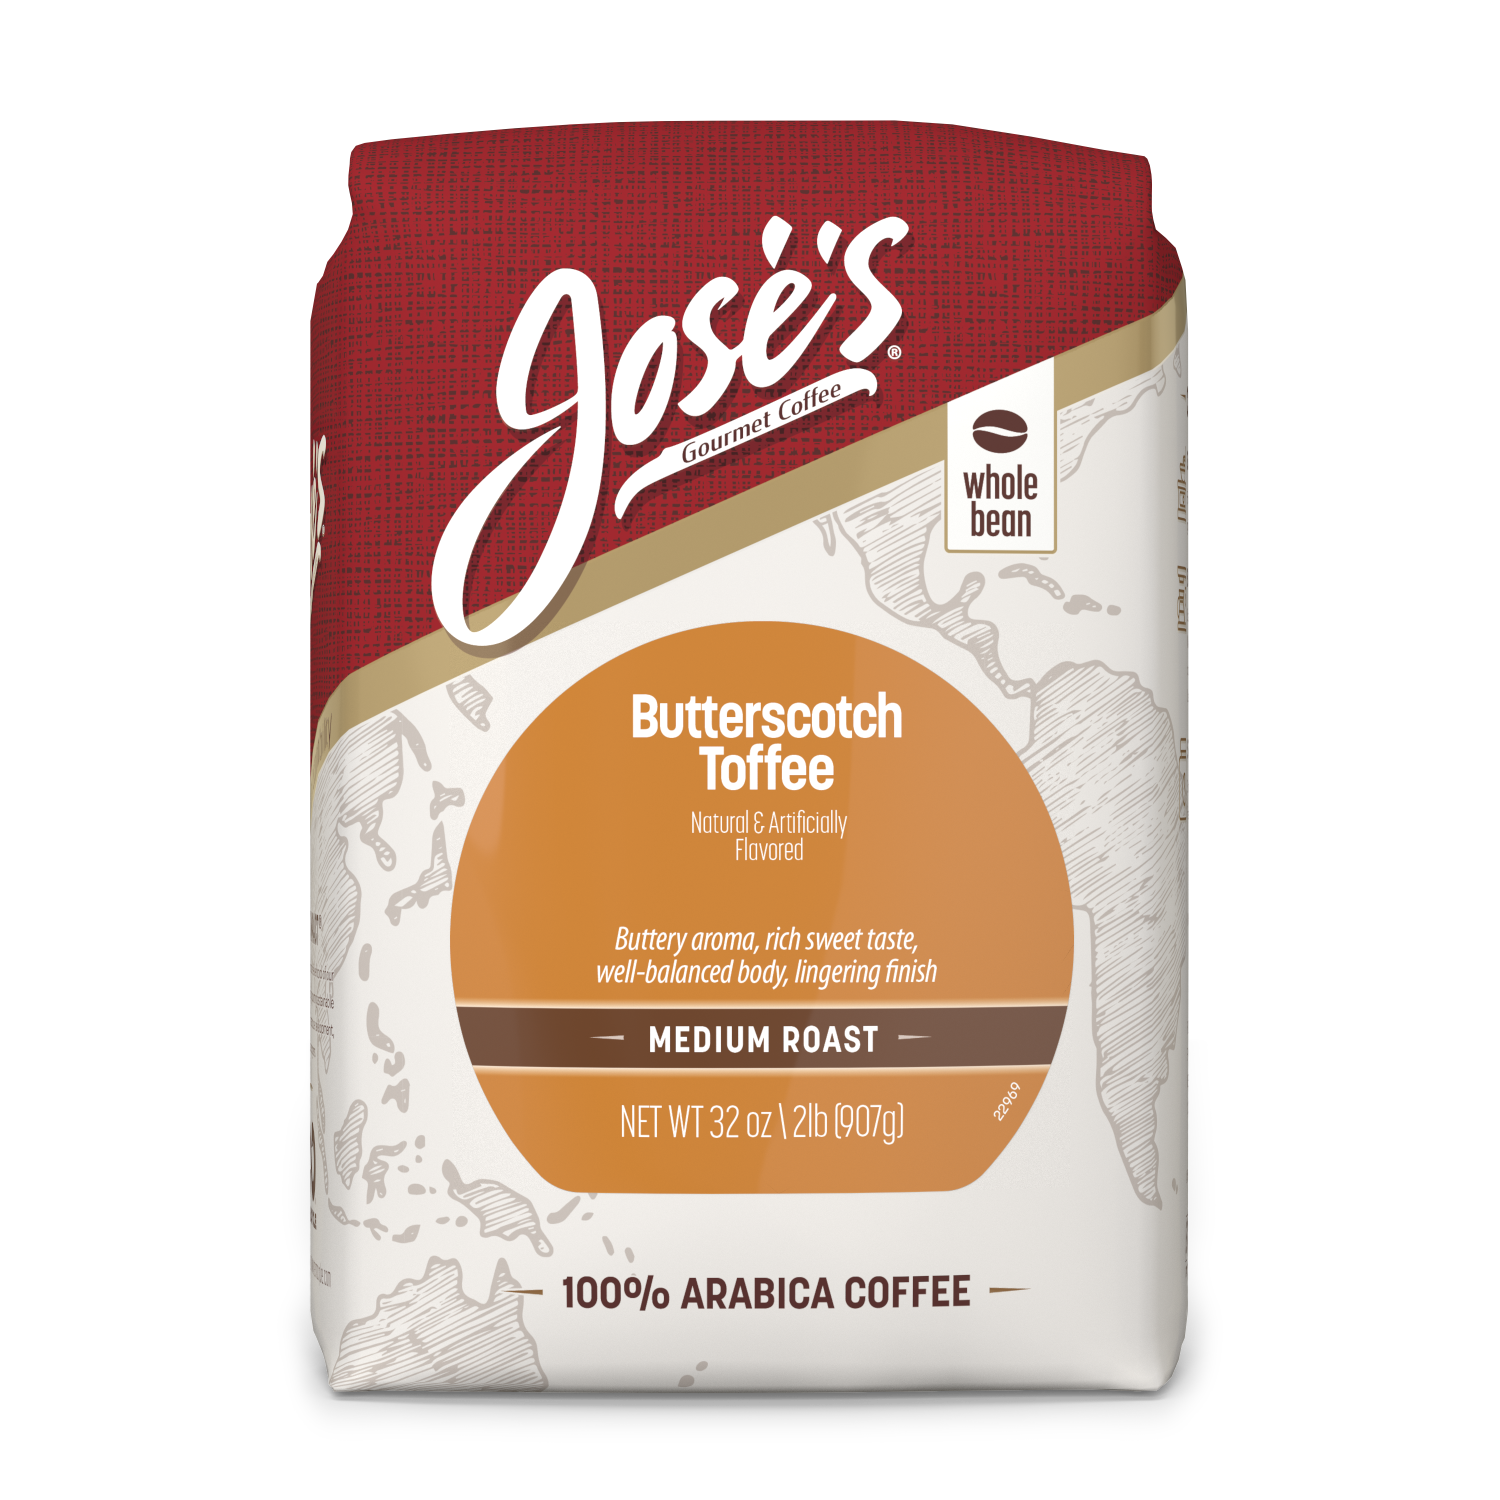 Joses Gourmet Coffee Butterscotch Toffee